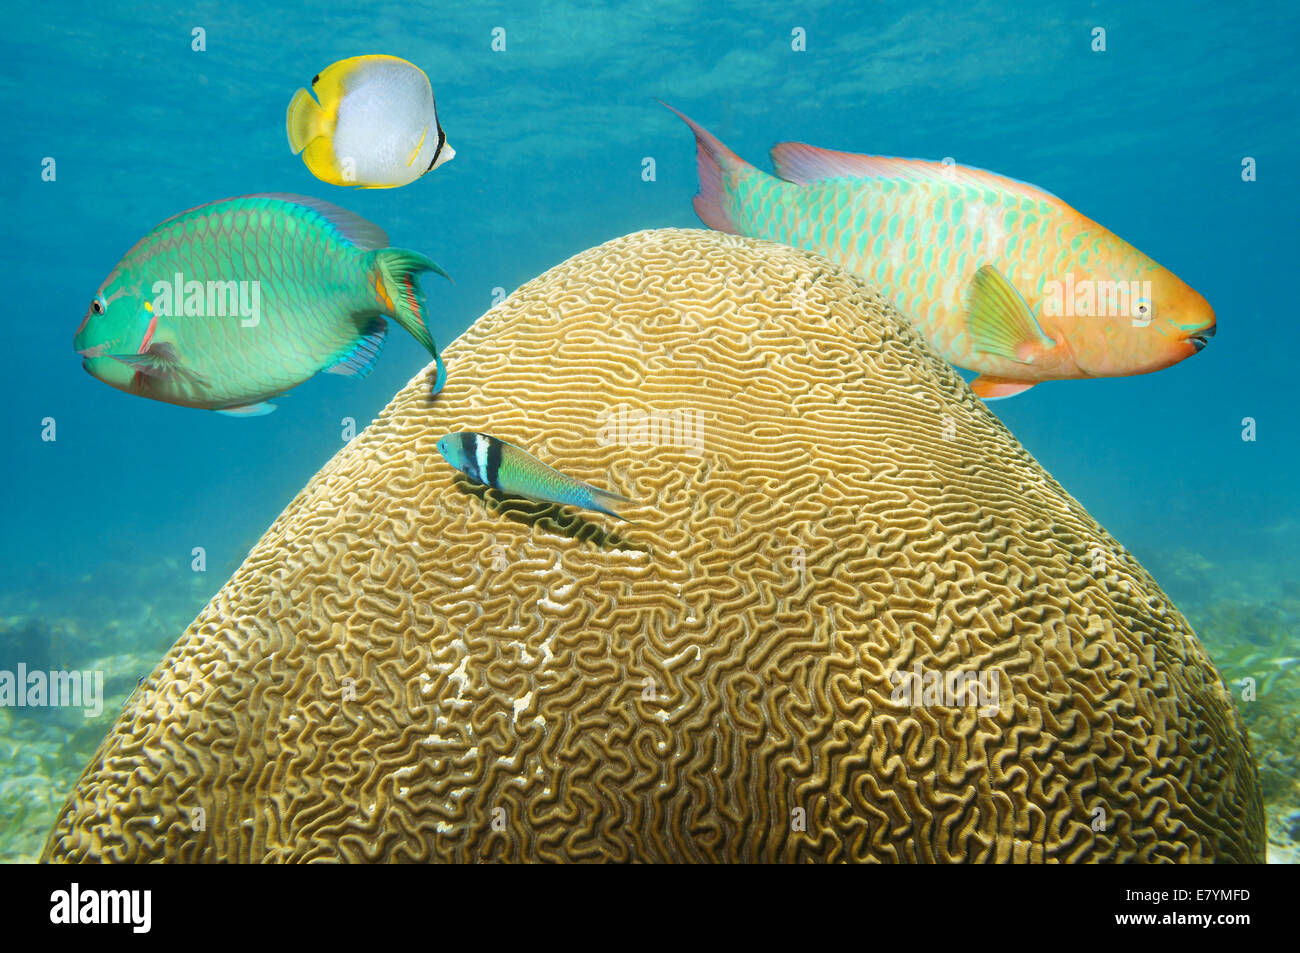 brain coral underwater with colorful tropical fish Stock Photo